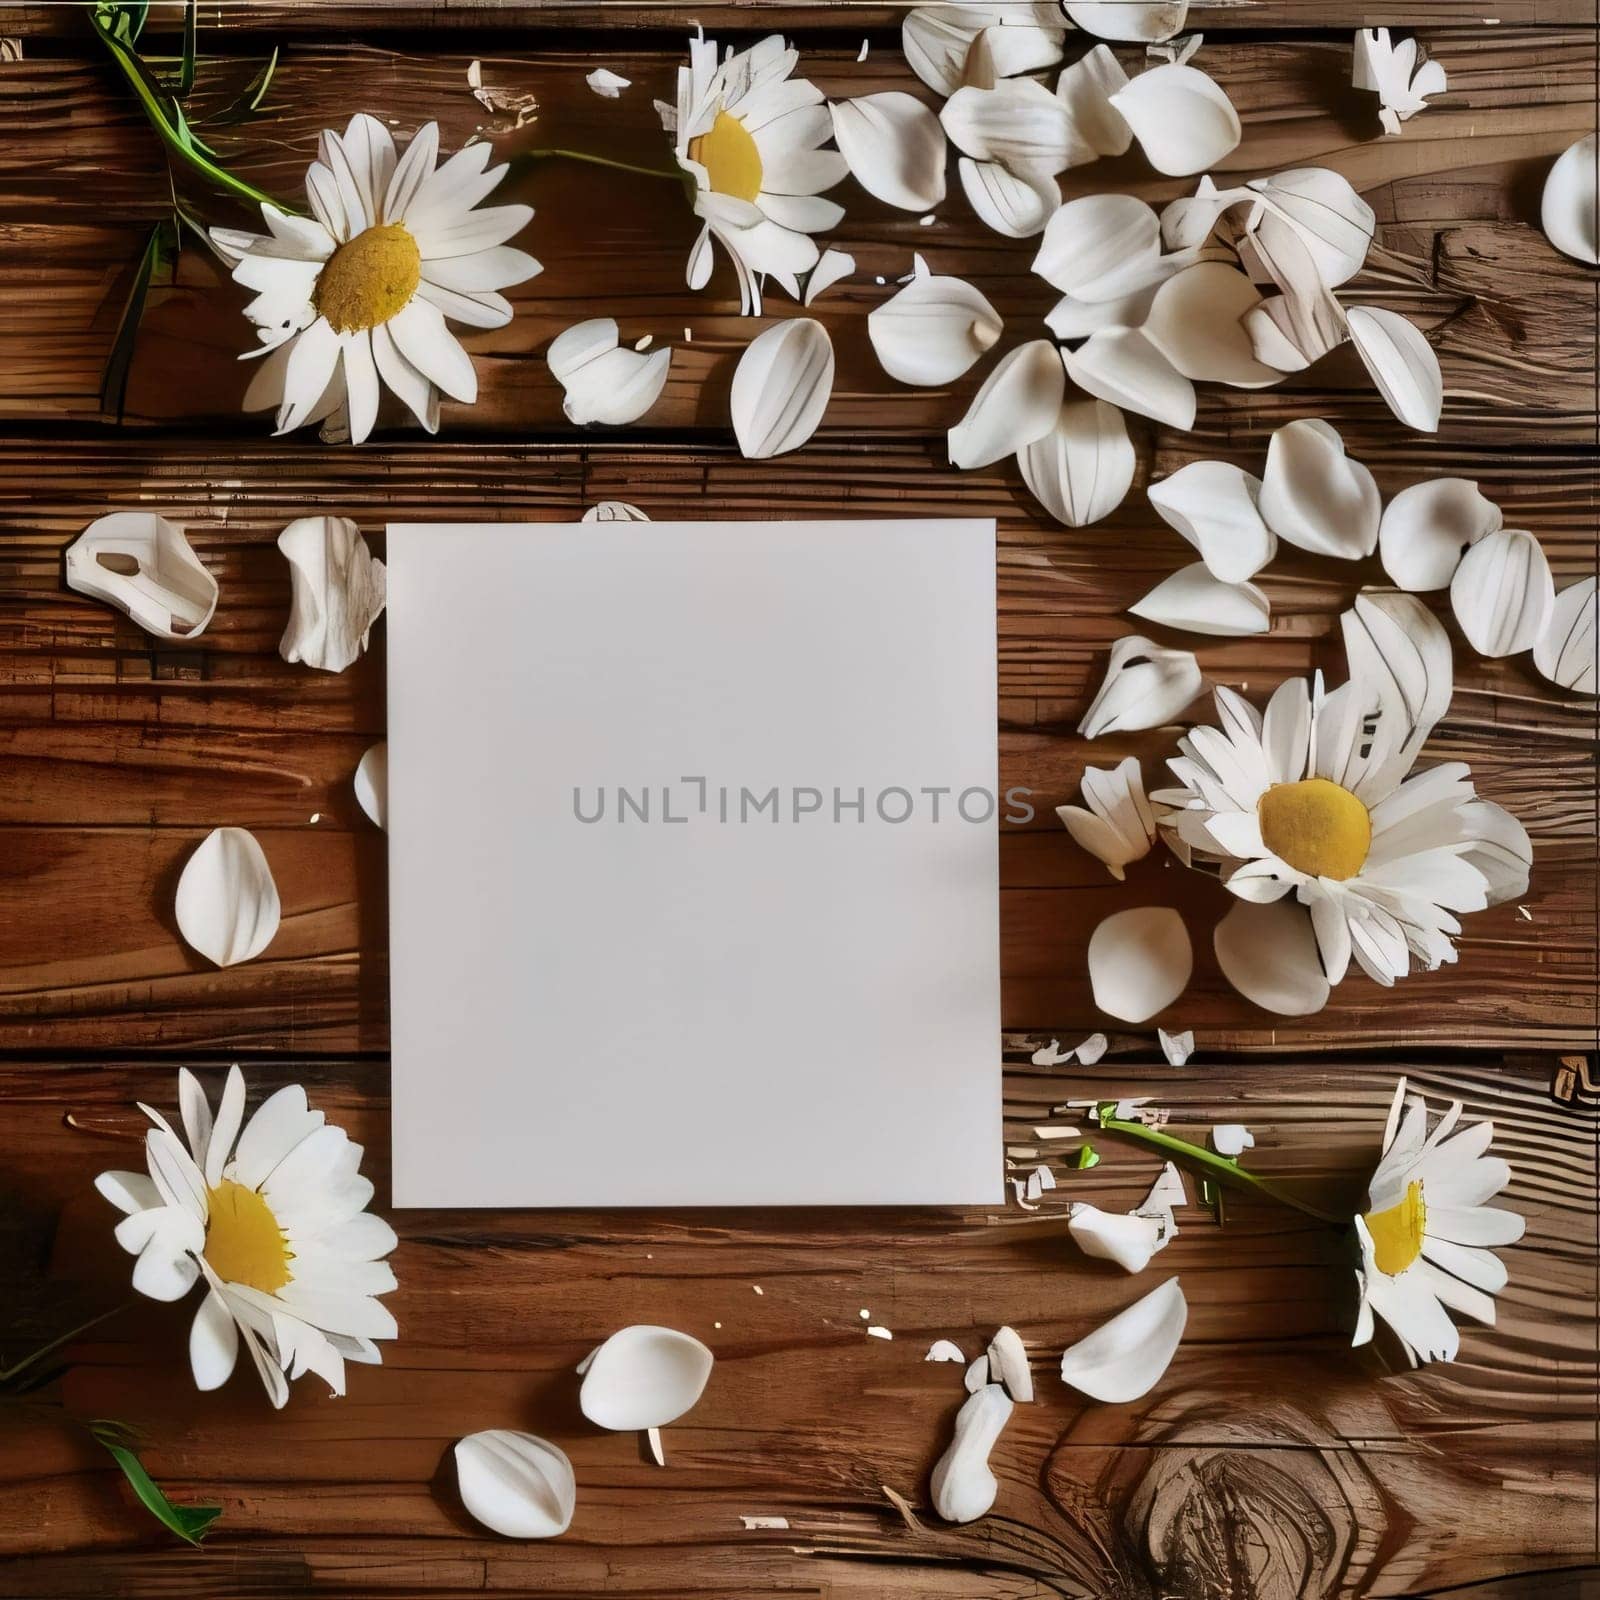 White blank card on a wooden background around scattered white flower petals. Places on their own content. Flowering flowers, a symbol of spring, new life. A joyful time of nature waking up to life.